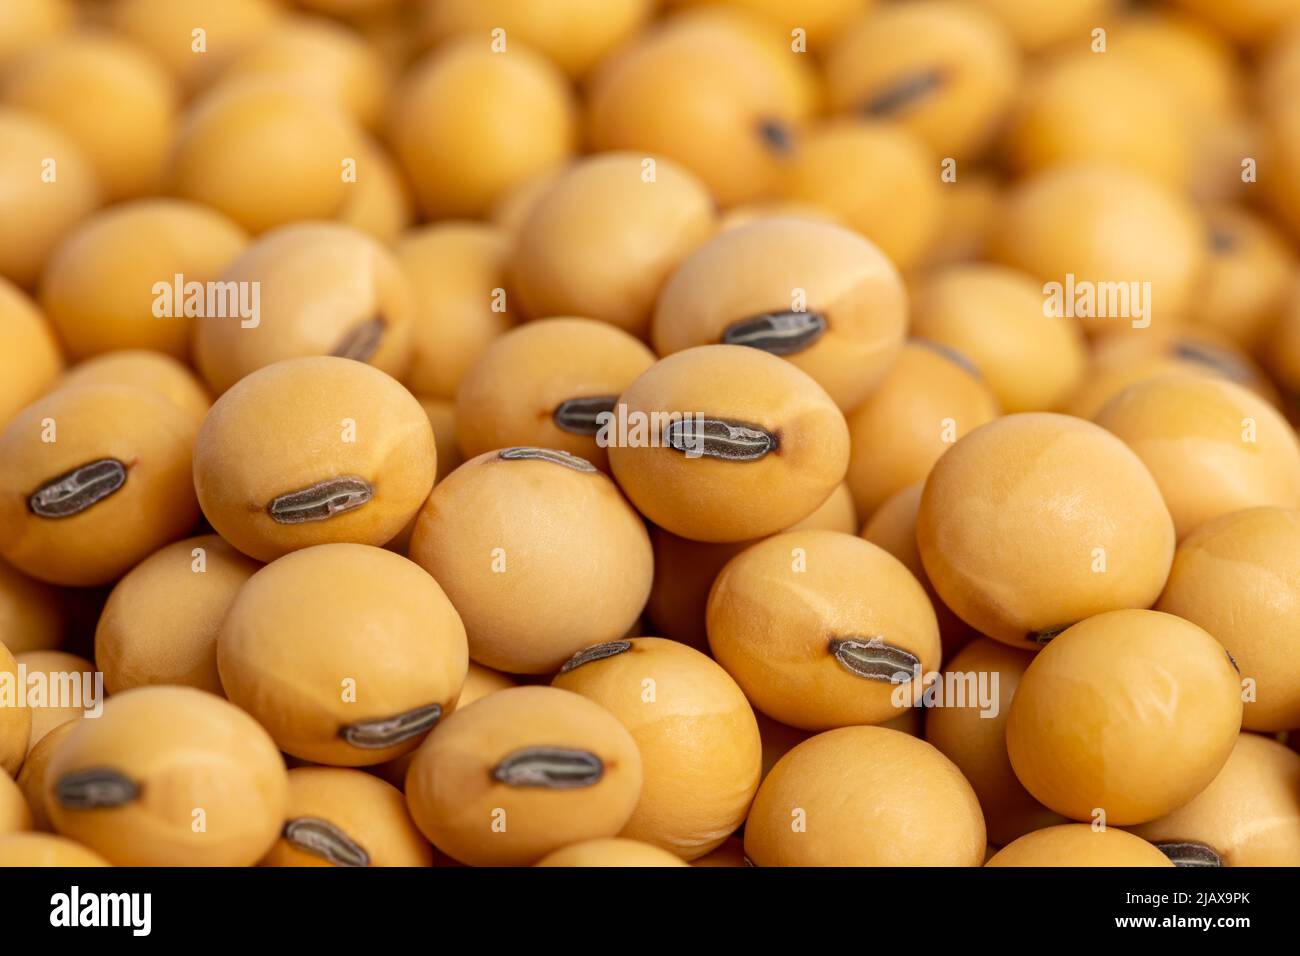 Closeup of soybean seeds. Agriculture trade, farming, and soy biofuel concept. Stock Photo